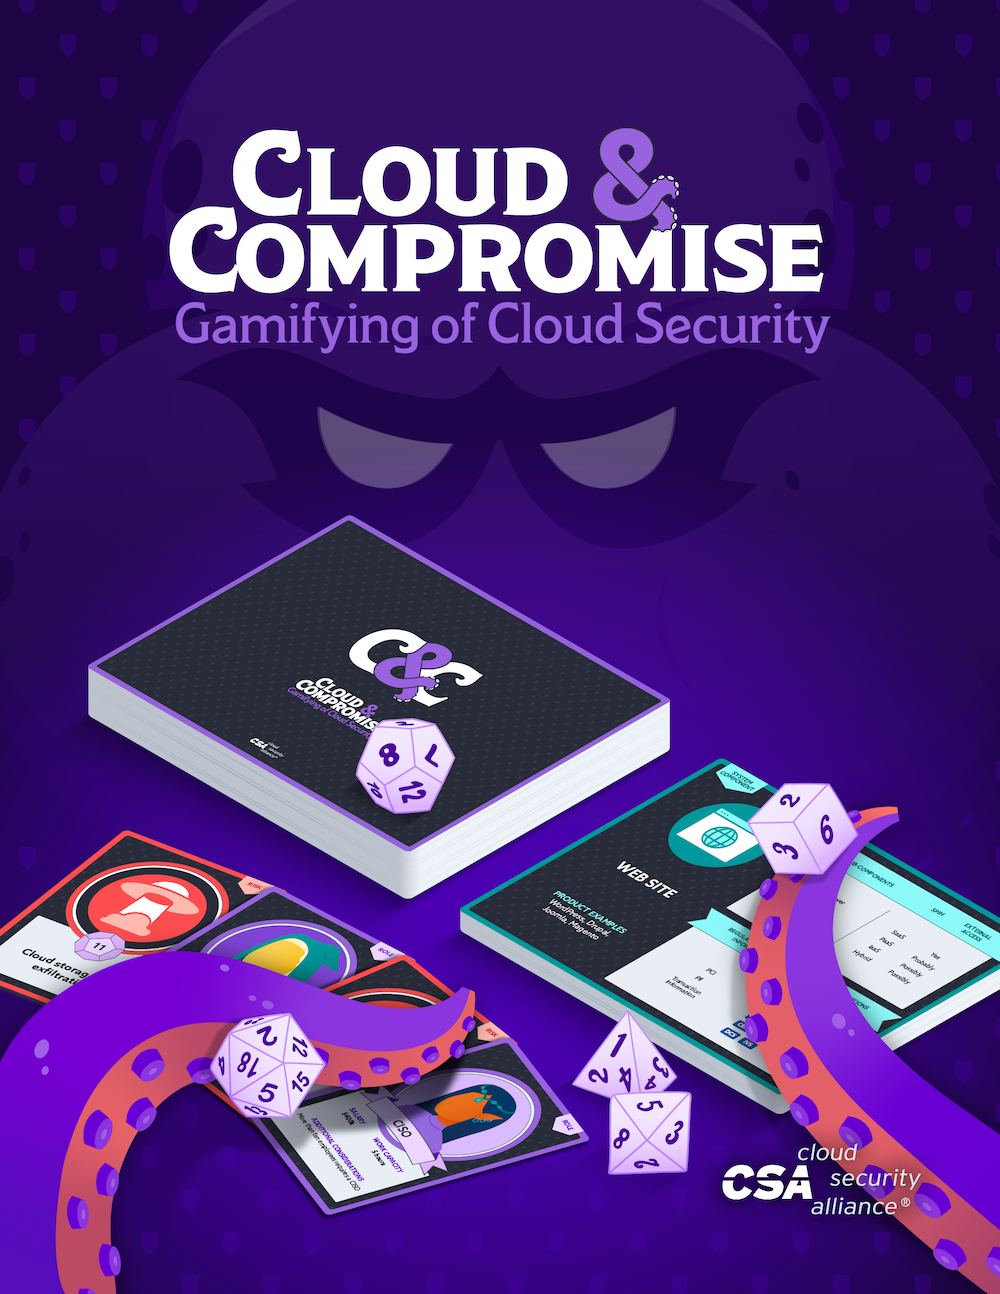 Cloud and Compromise (C&C): Gamifying of Cloud Security